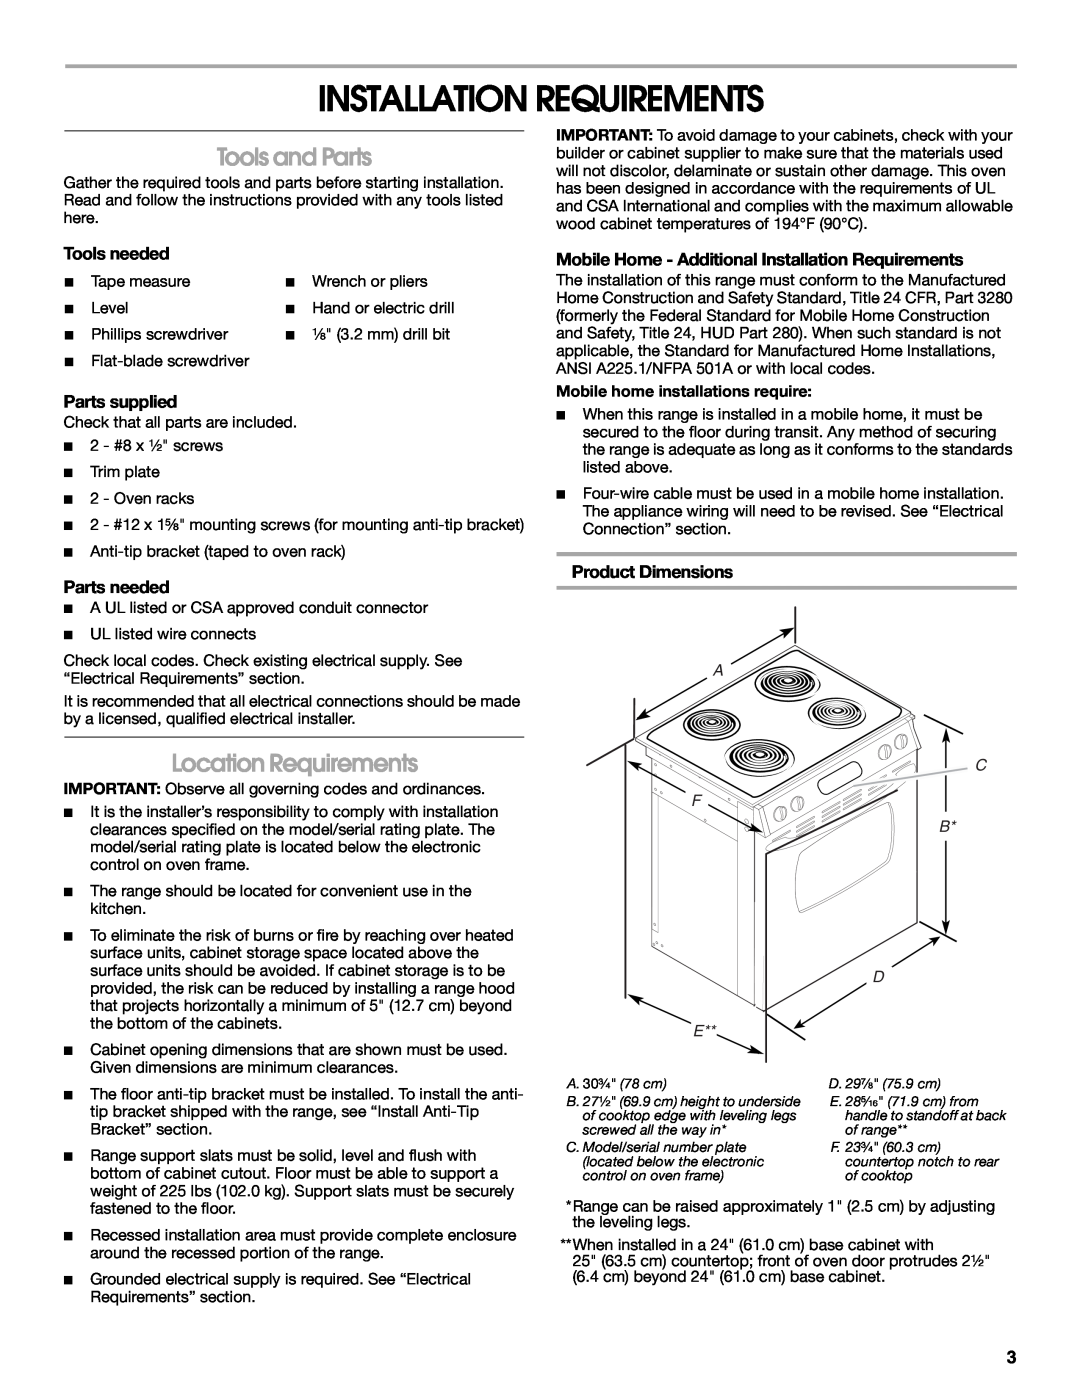 Whirlpool Drop-In Electric Range Installation Requirements, Tools and Parts, Location Requirements, Tools needed, A C F B 